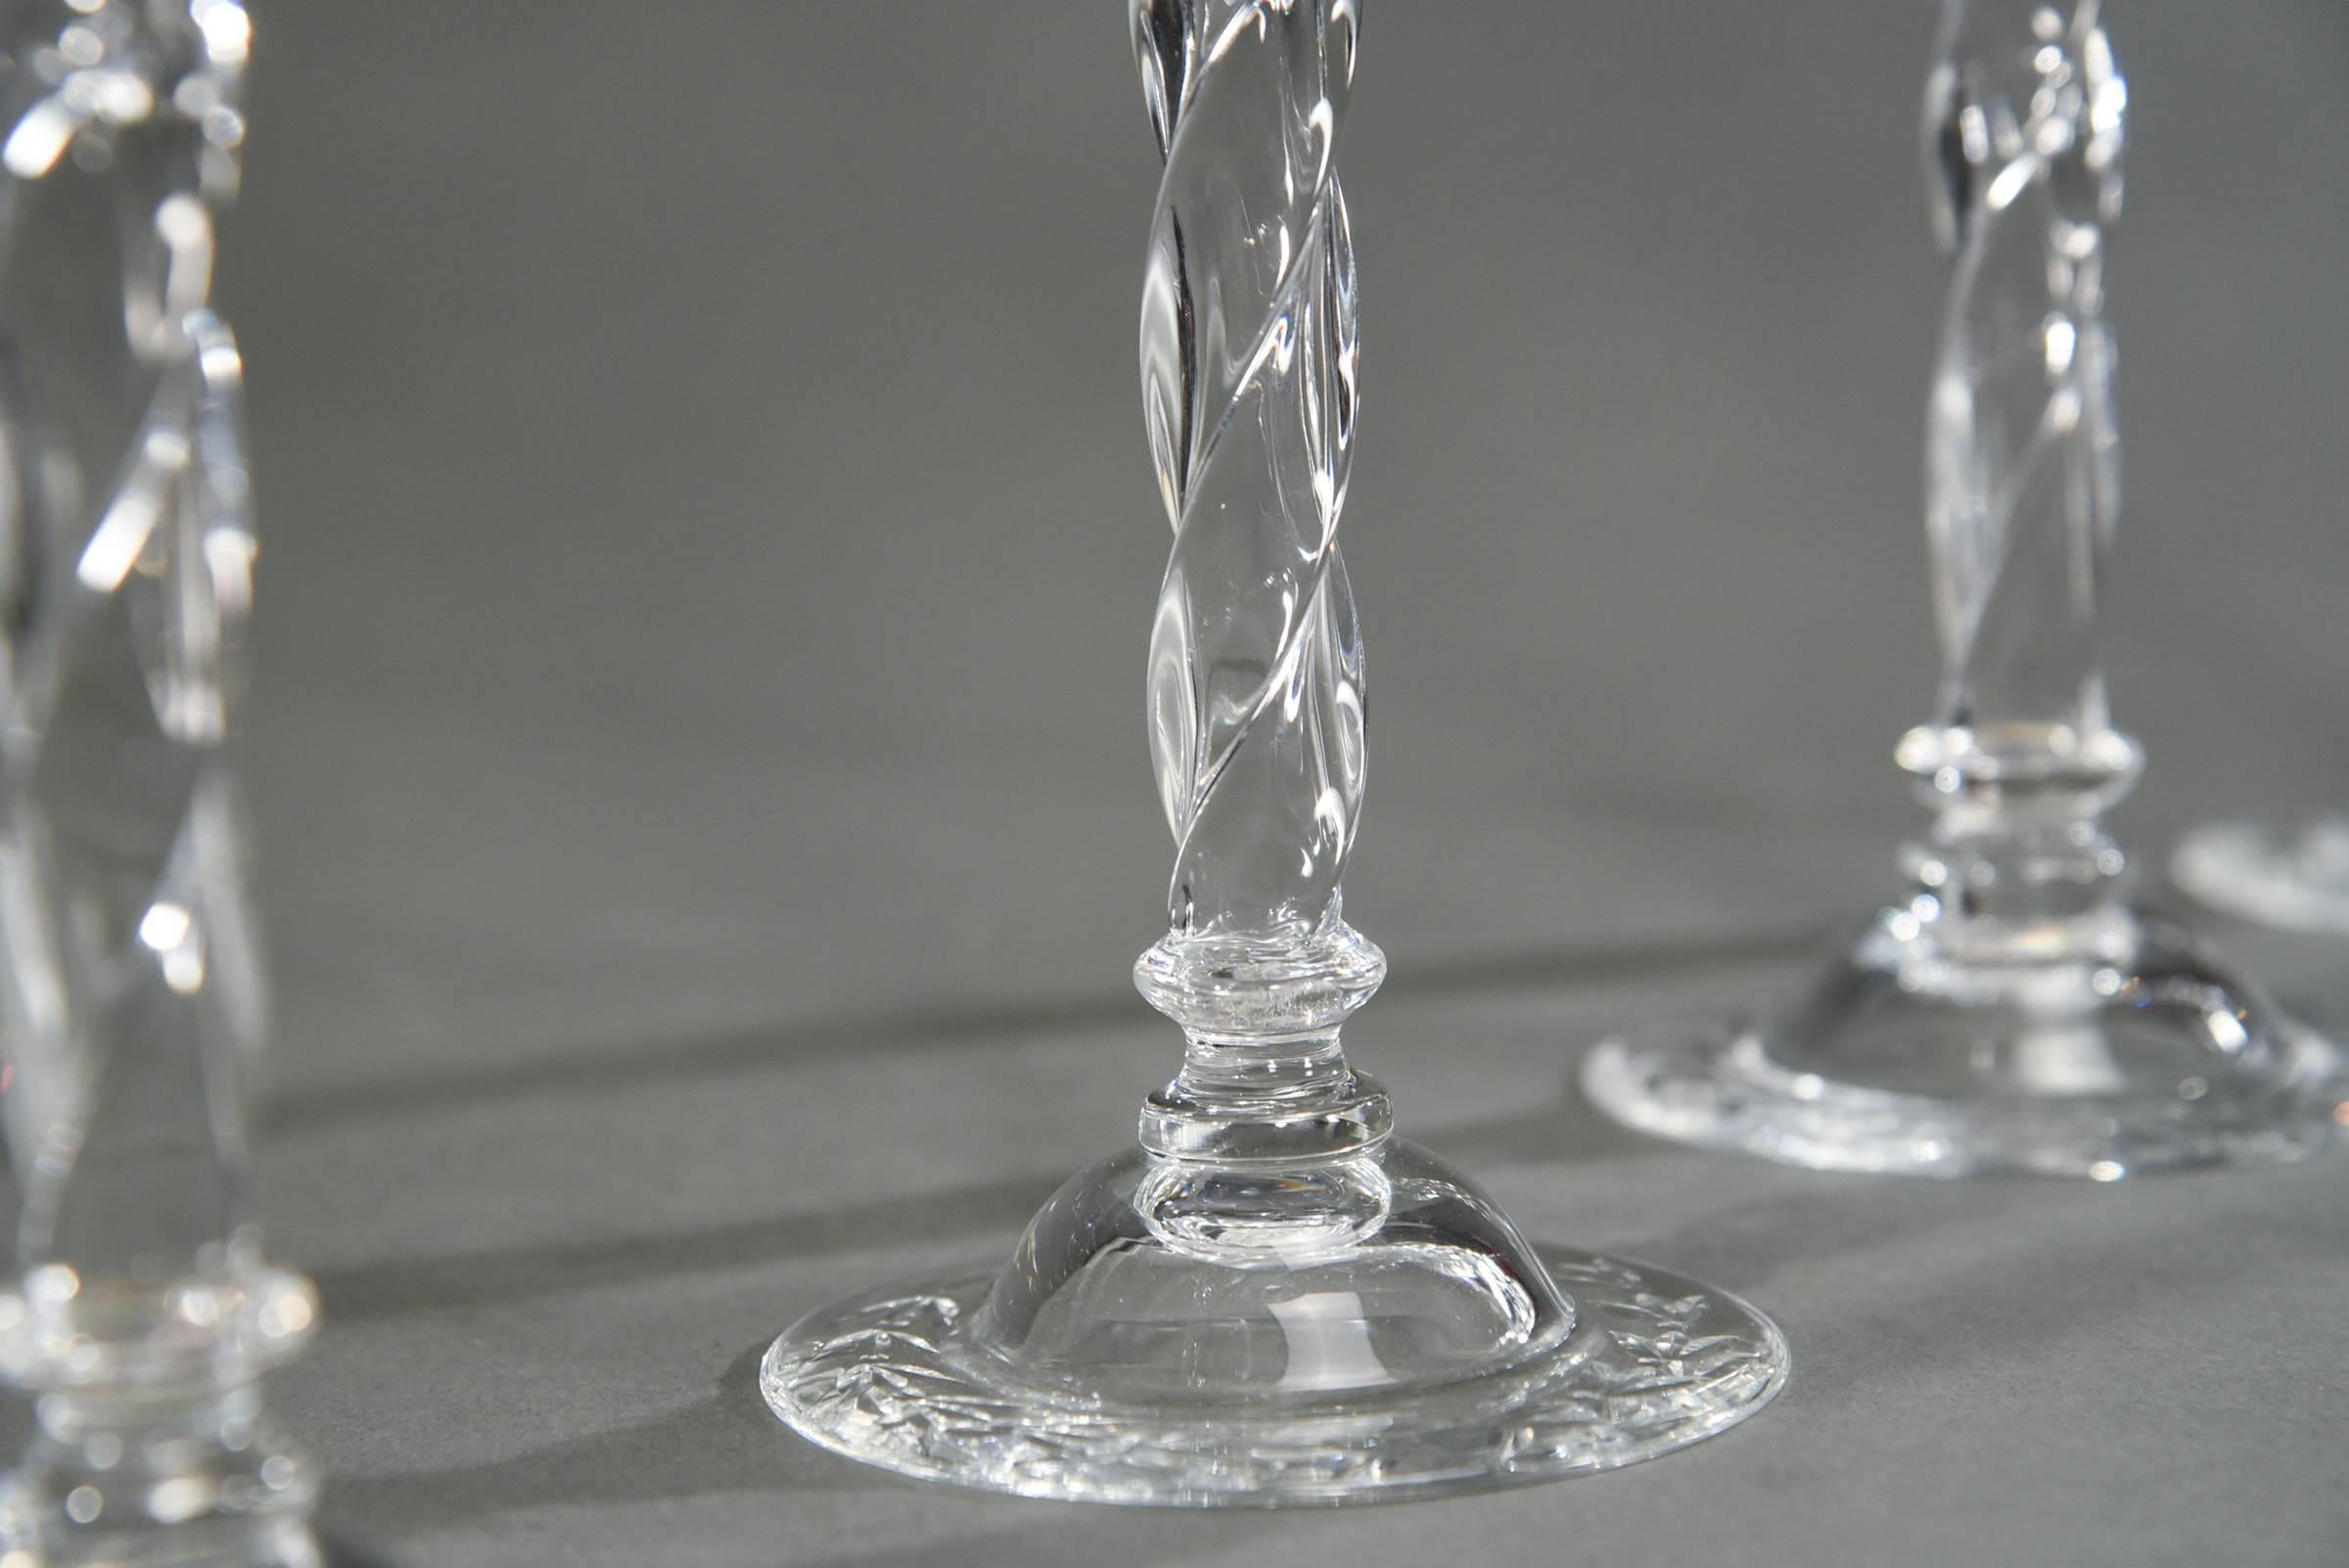 Set of 12 Webb Tall Handblown Crystal Goblets with Wheel Cutting and Spiral Stem 1